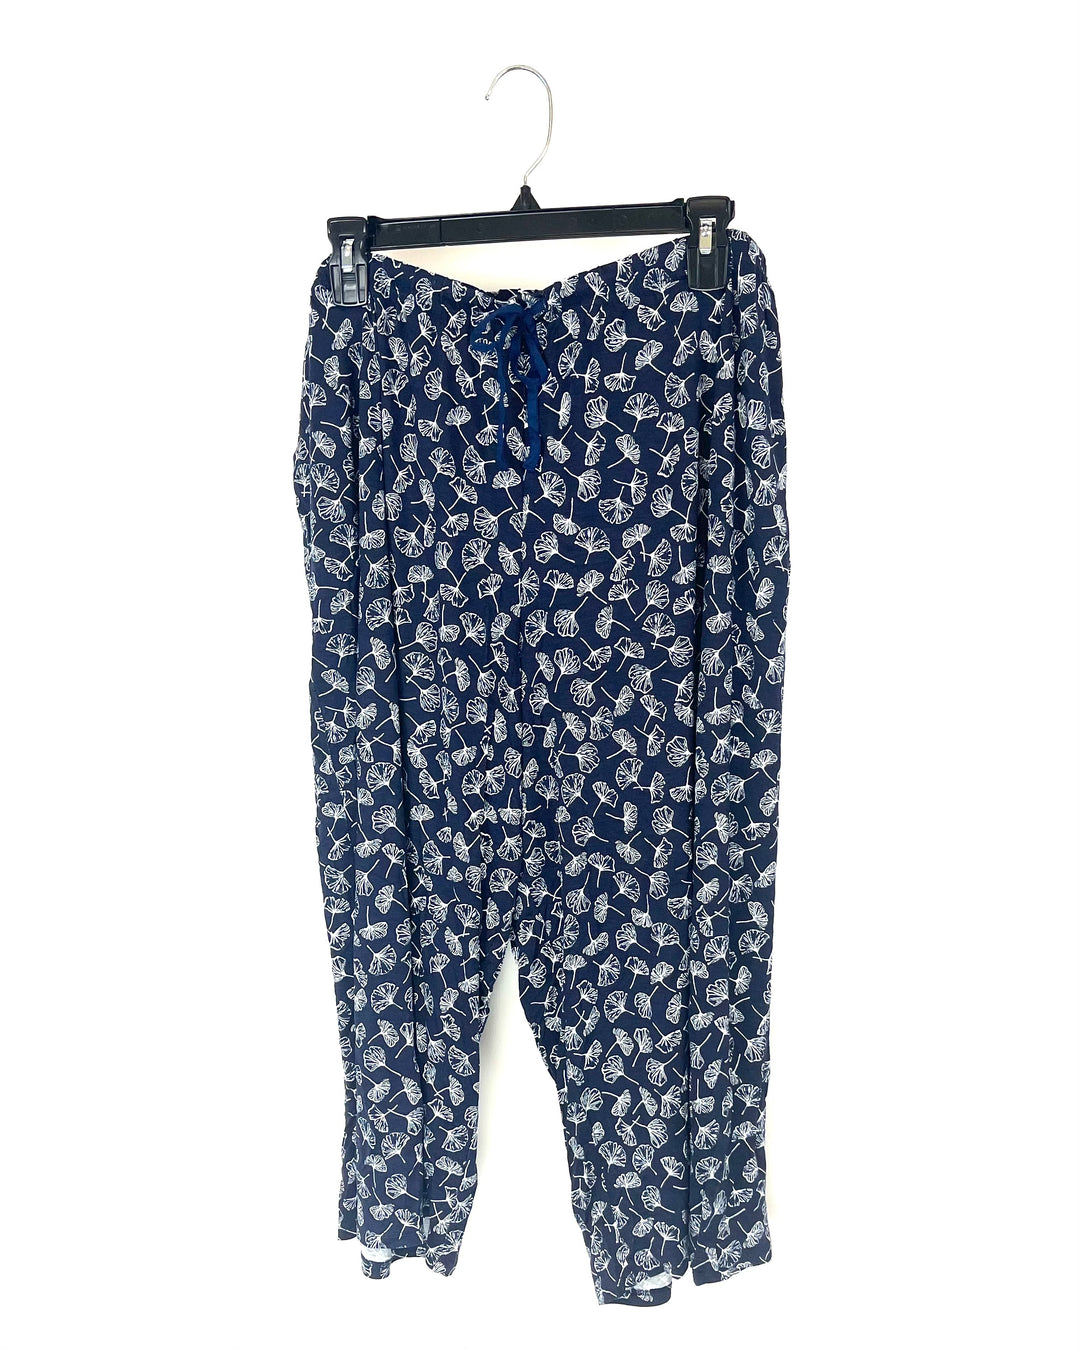 Navy Blue Floral Cropped Pajama Pants - Size 1X